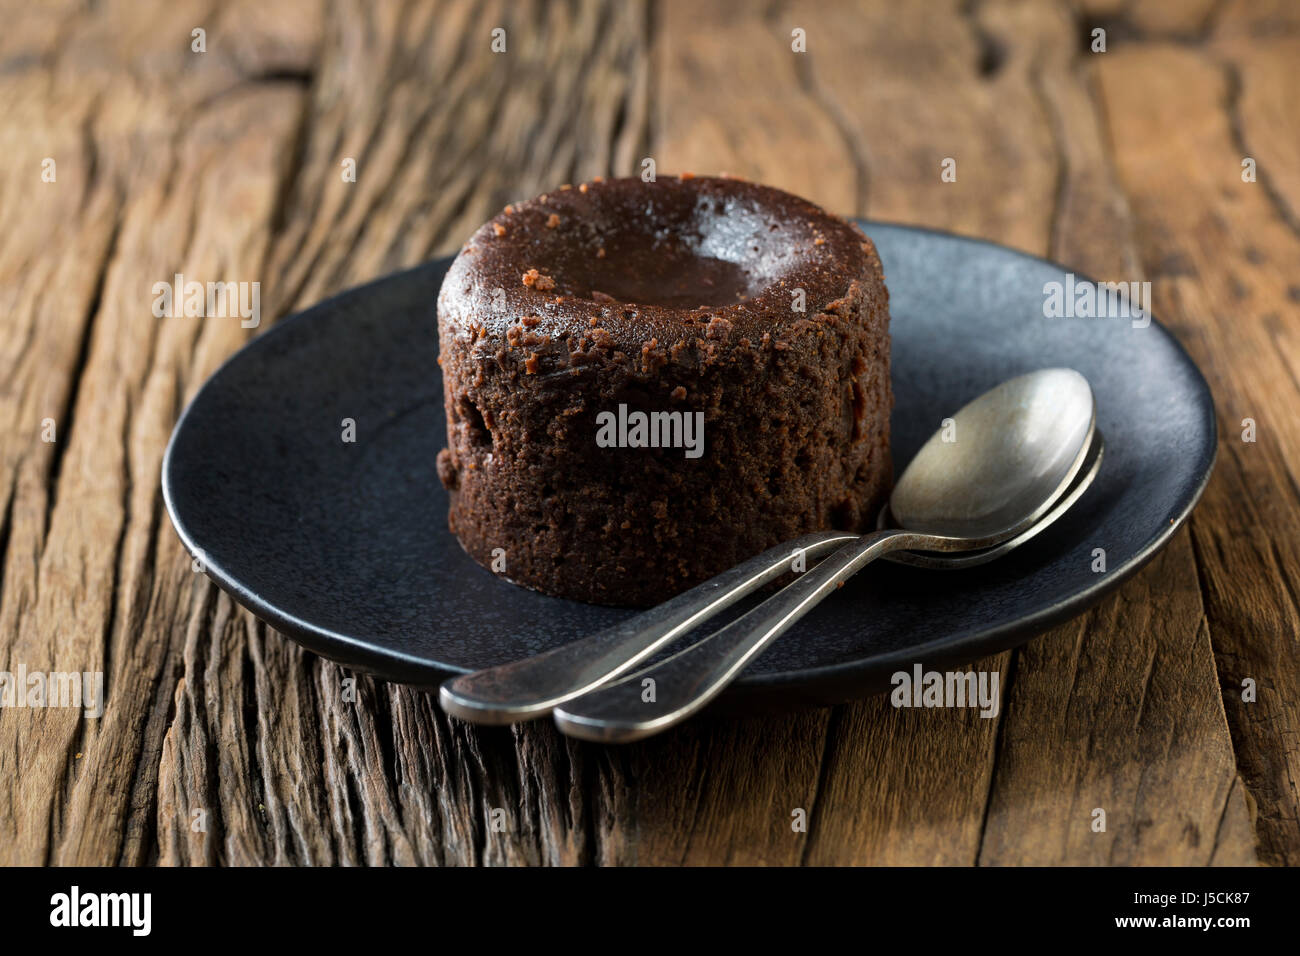 Homemade Chocolate Lava Cake. Chocolate pudding sitting on a rustic wooden table. Stock Photo